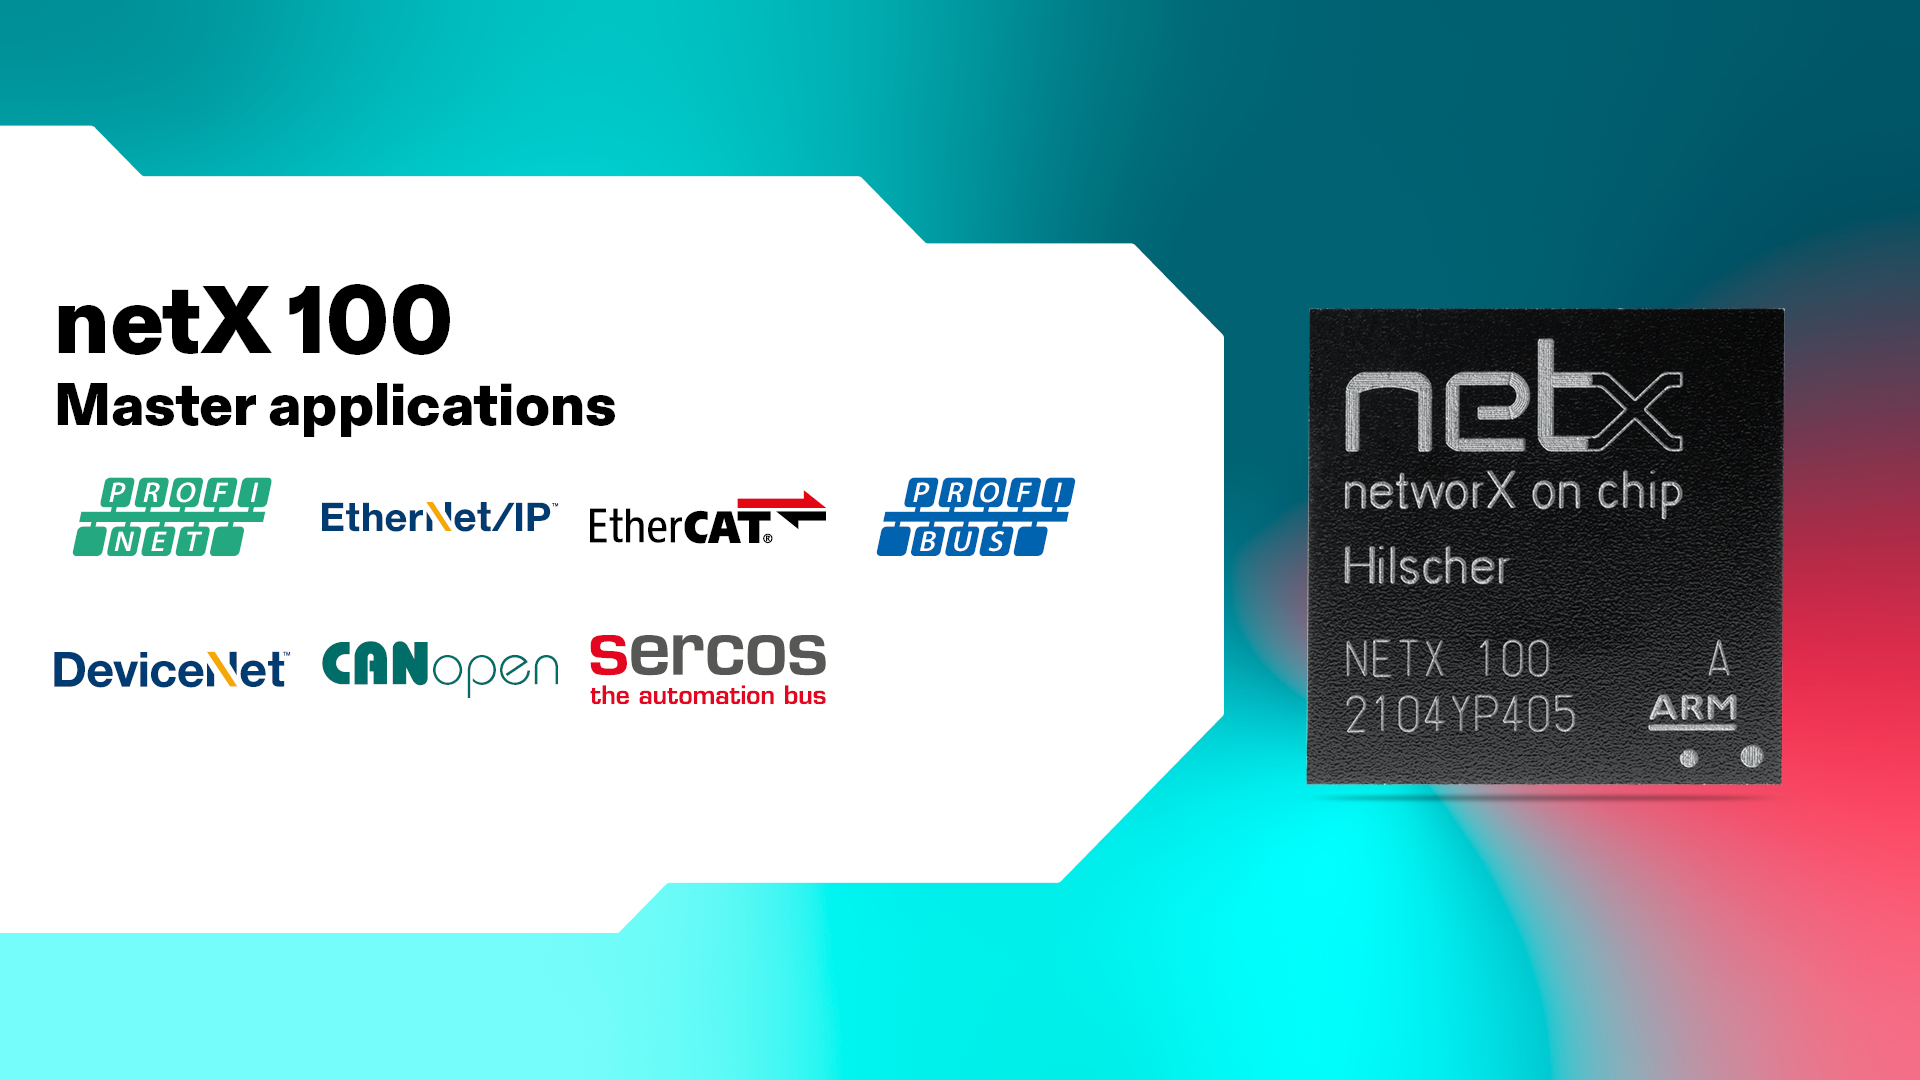 A netX 100 graphic in black on the right side on colorful background. Numerous protocol logos on a white background in an angular form on the left.